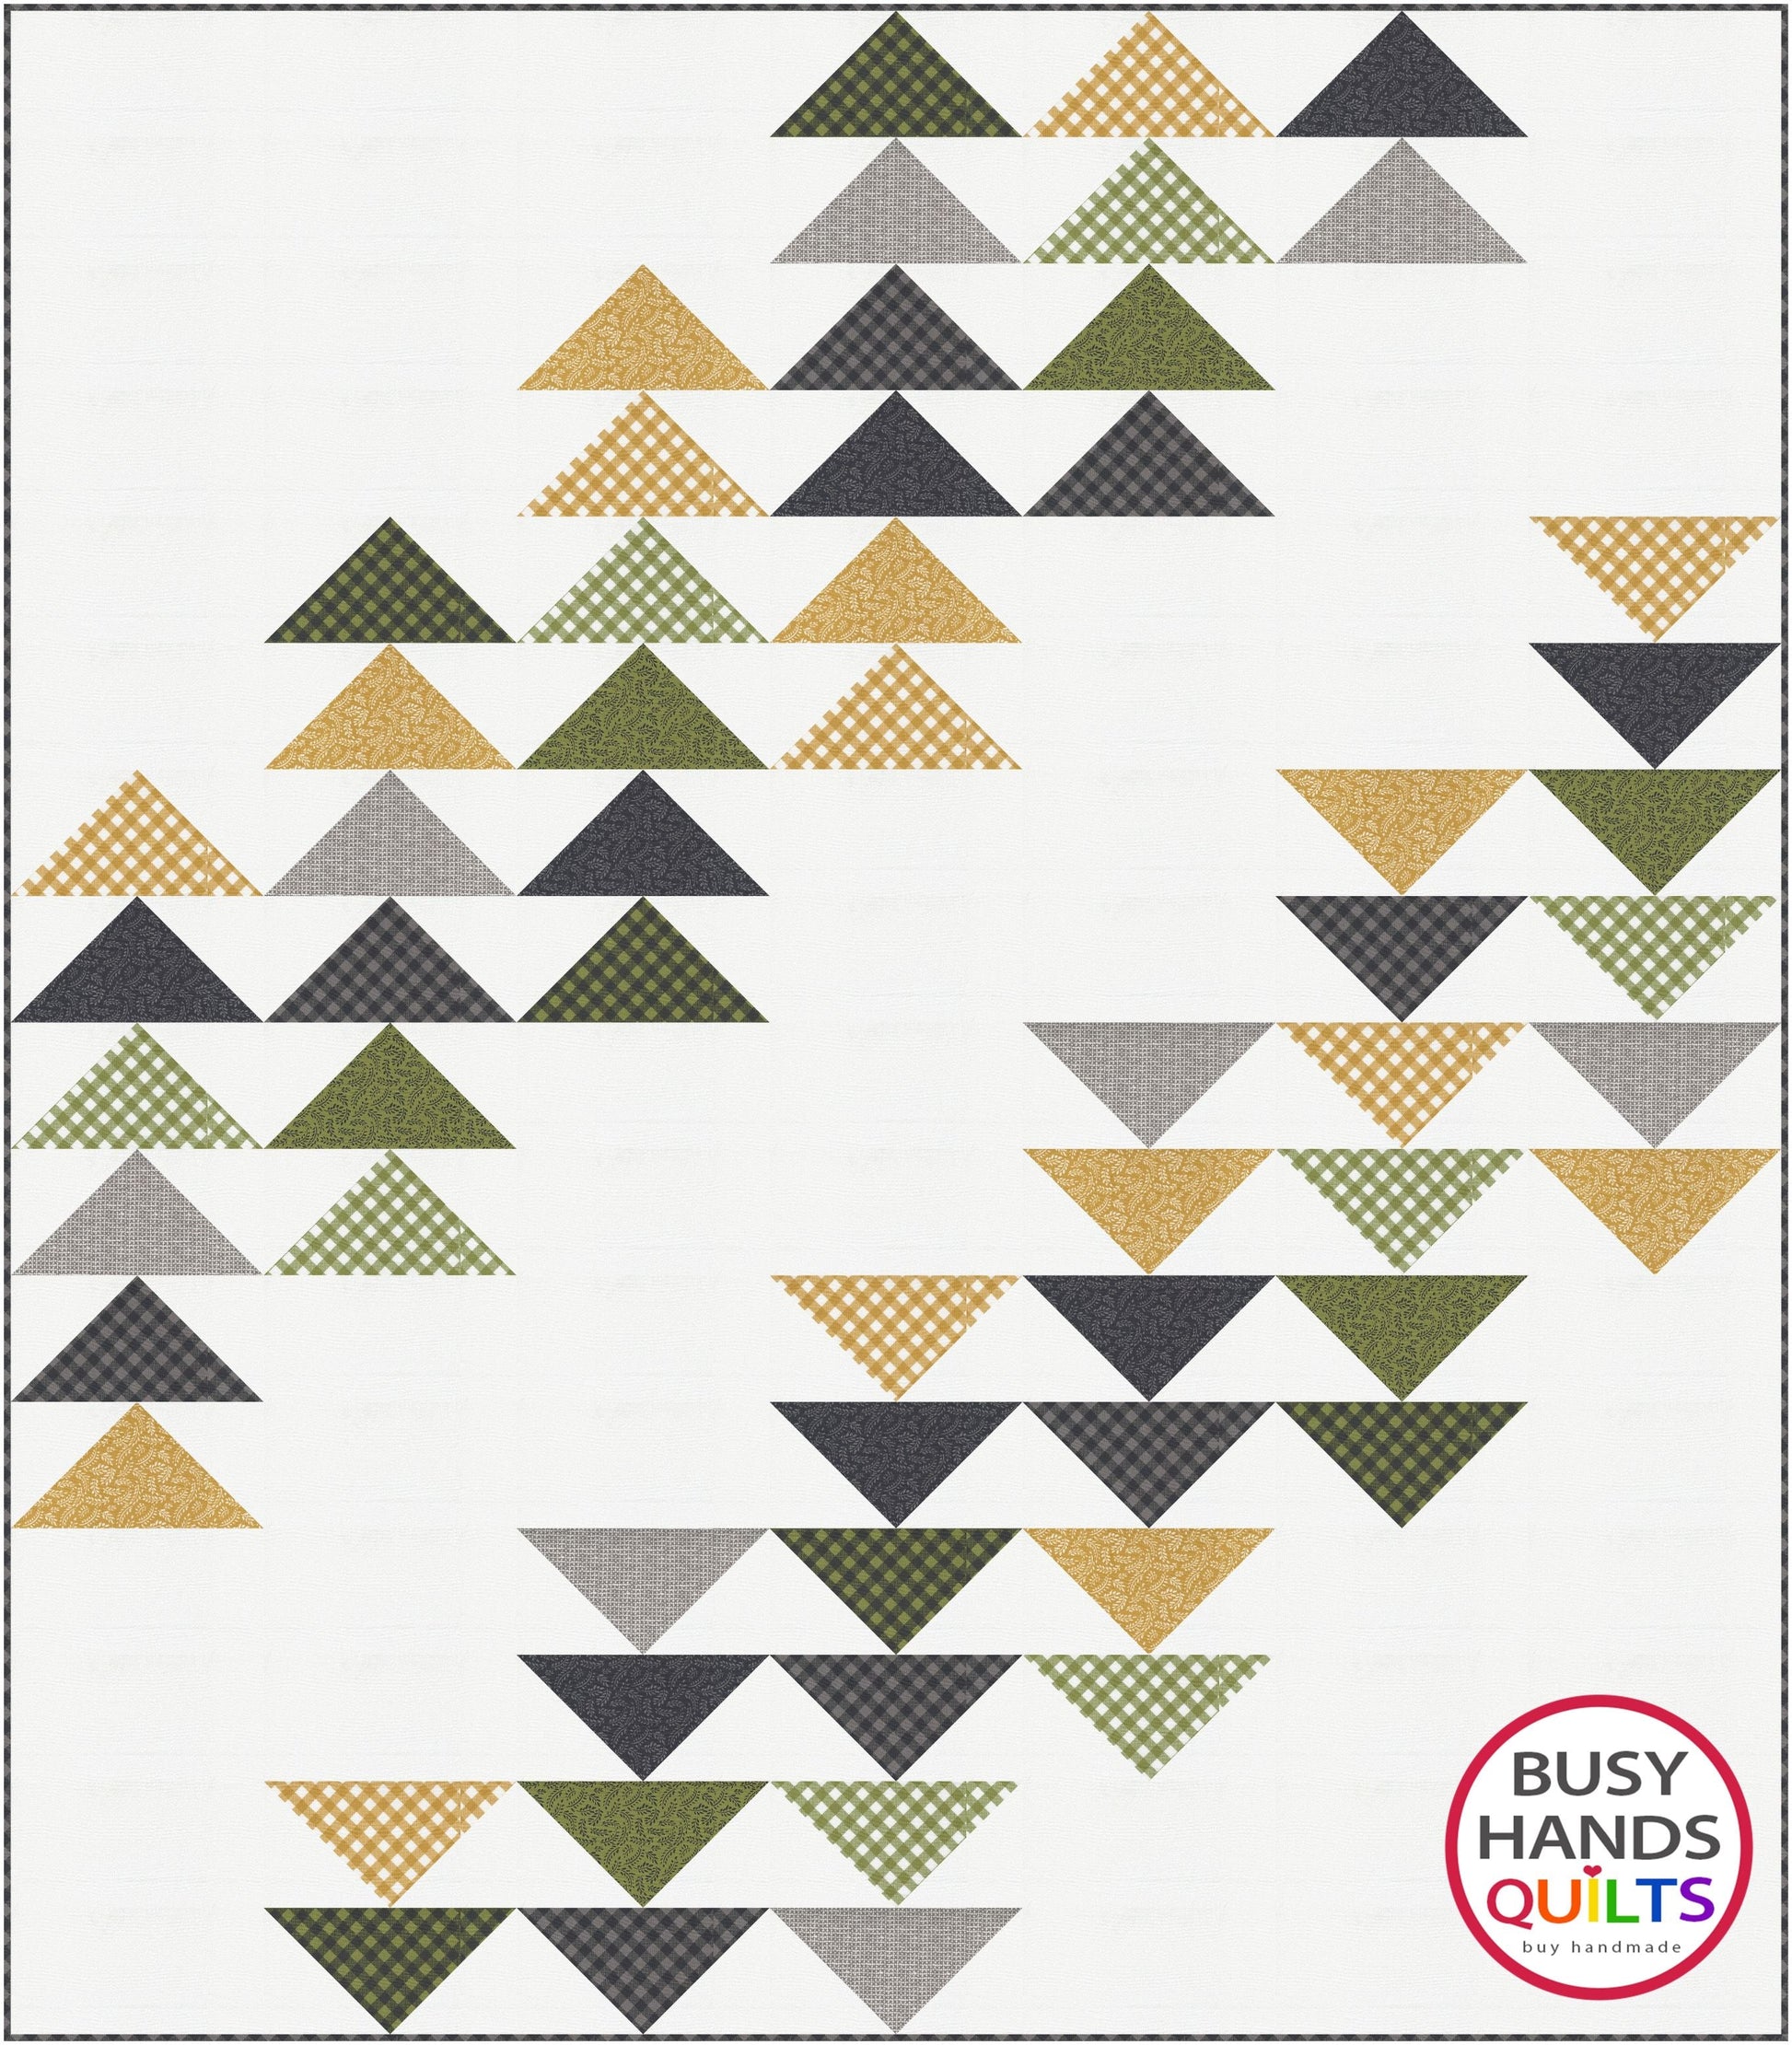 Formation Quilt Pattern PDF DOWNLOAD Busy Hands Quilts $12.99